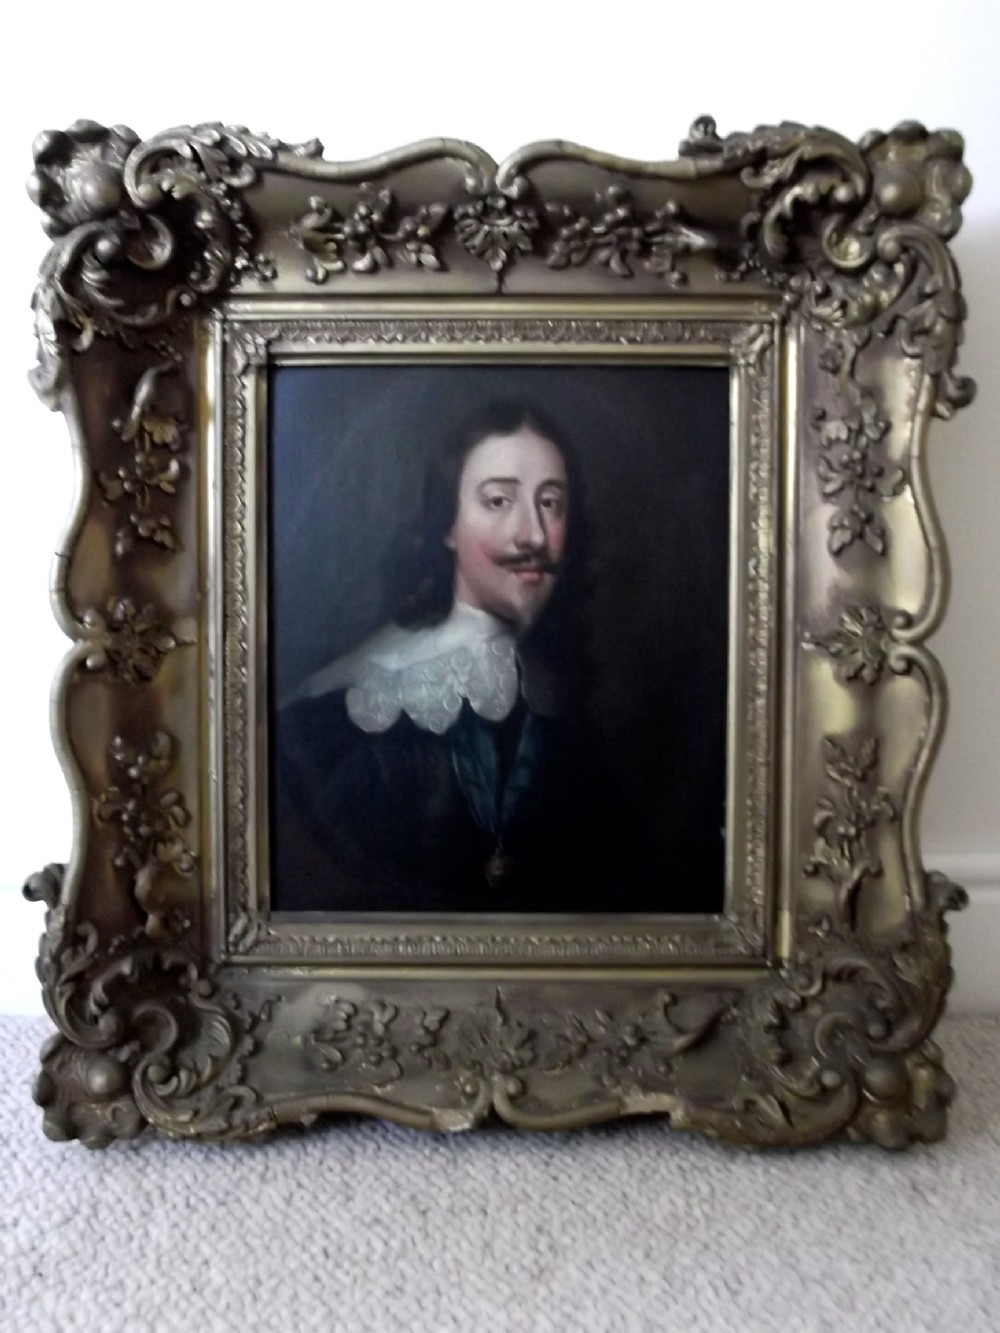 17thc portrait of king charles 1st 15991641 after van dyck in later frame